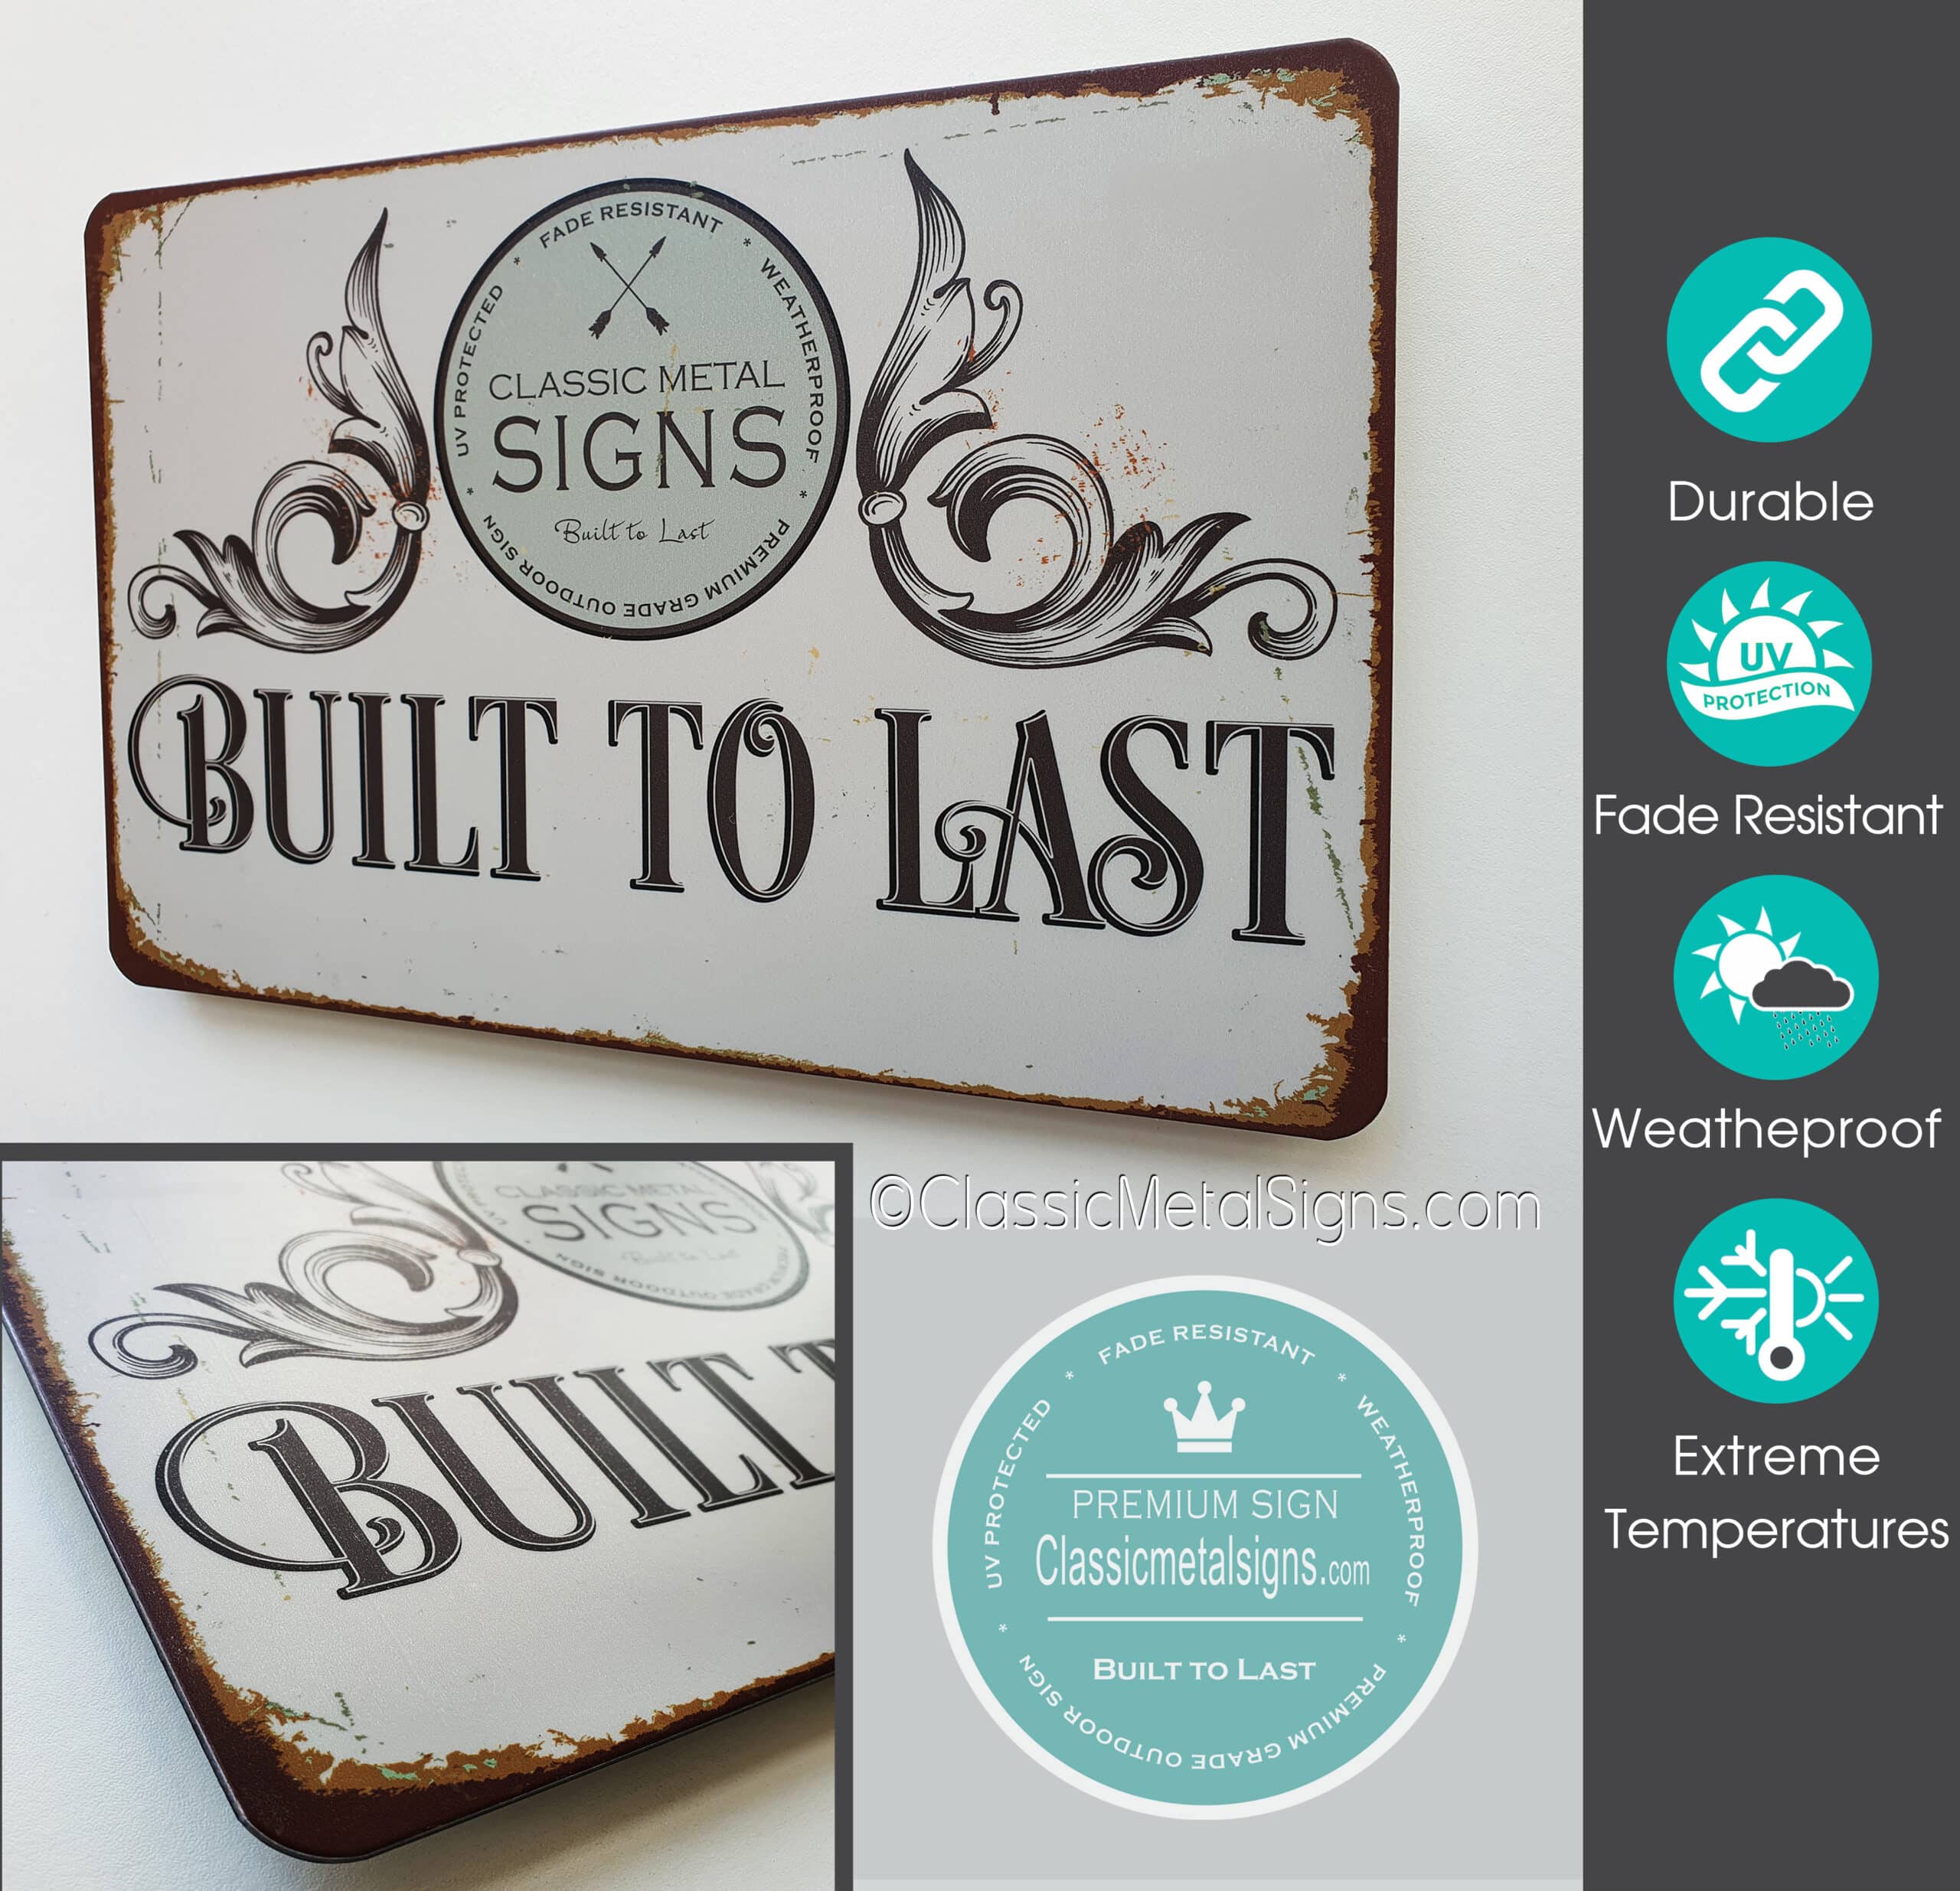 Sign-With-Icons-Classic-Metal-Signs-2.jpg